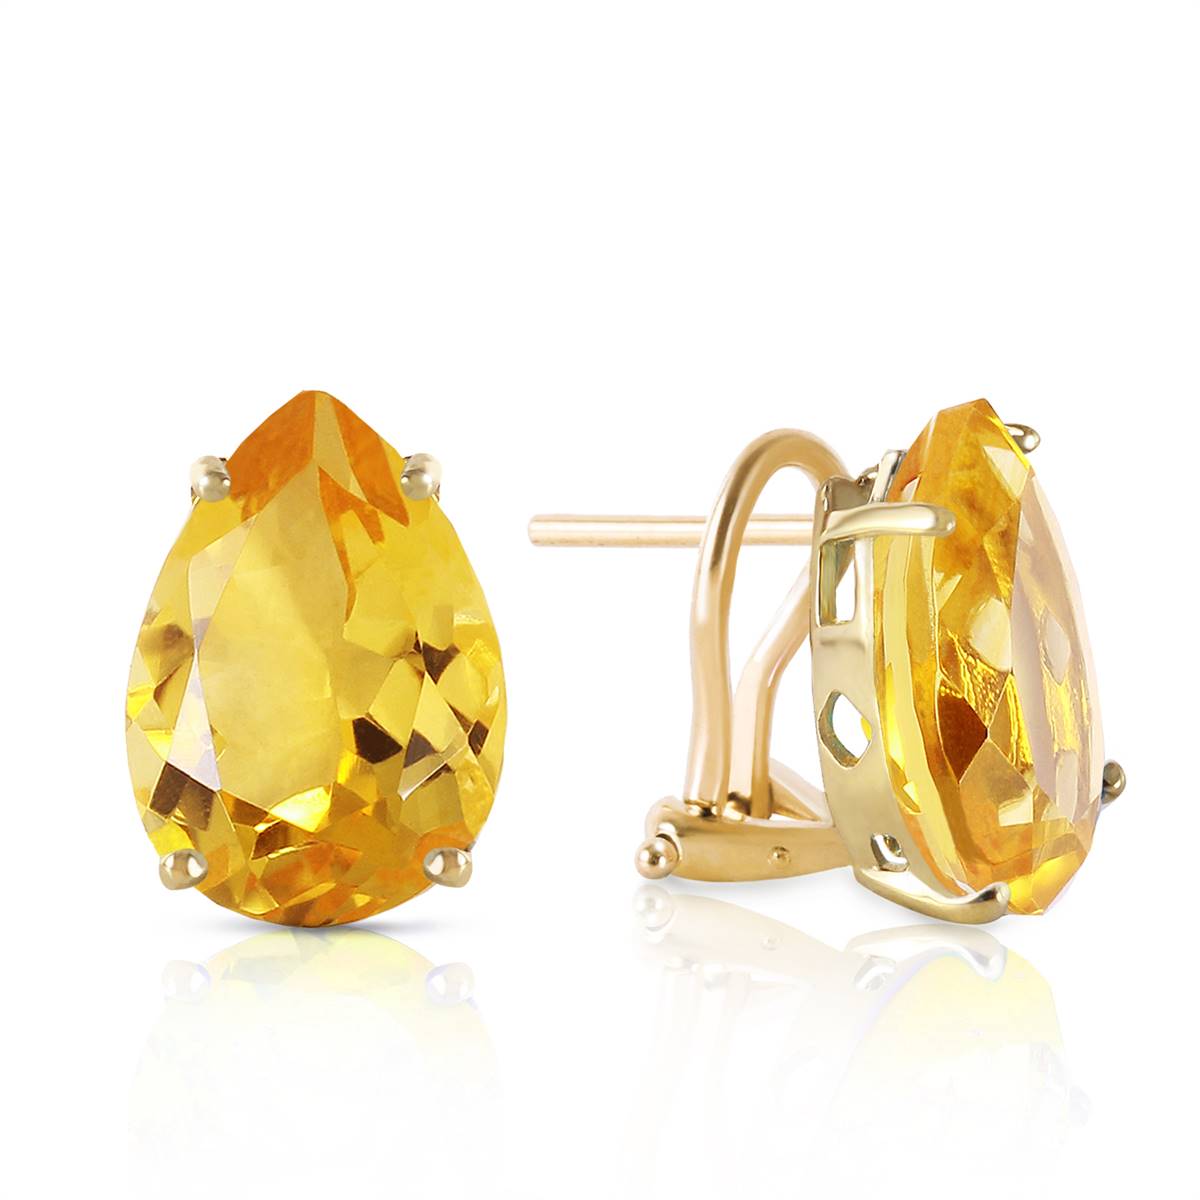 10 Carat 14K Solid Yellow Gold Inspiration Citrine Earrings